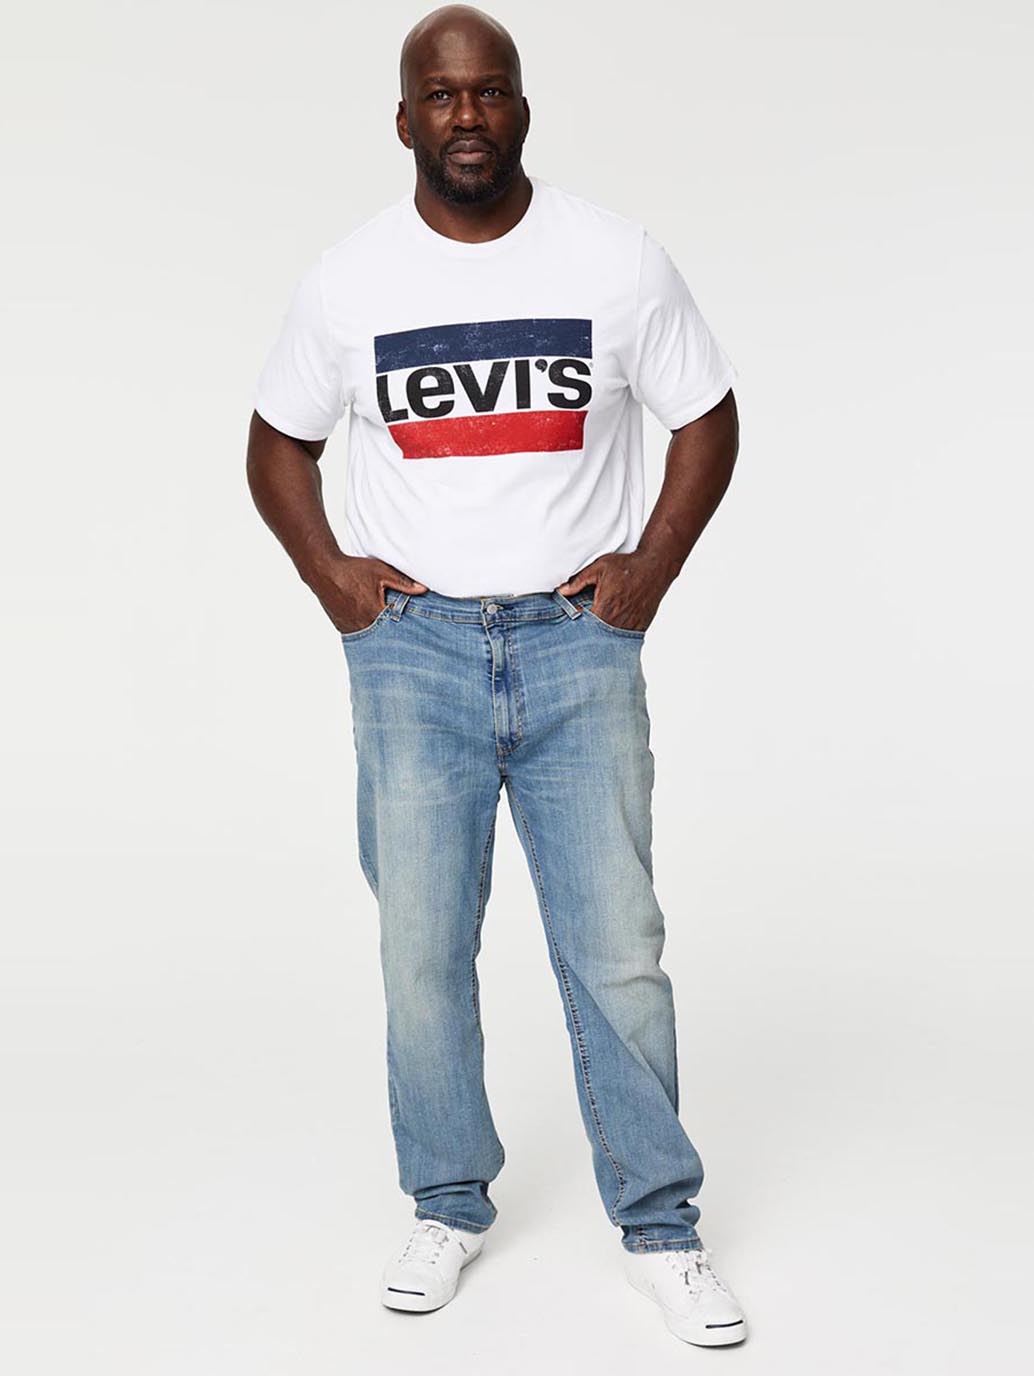 levis for athletic build